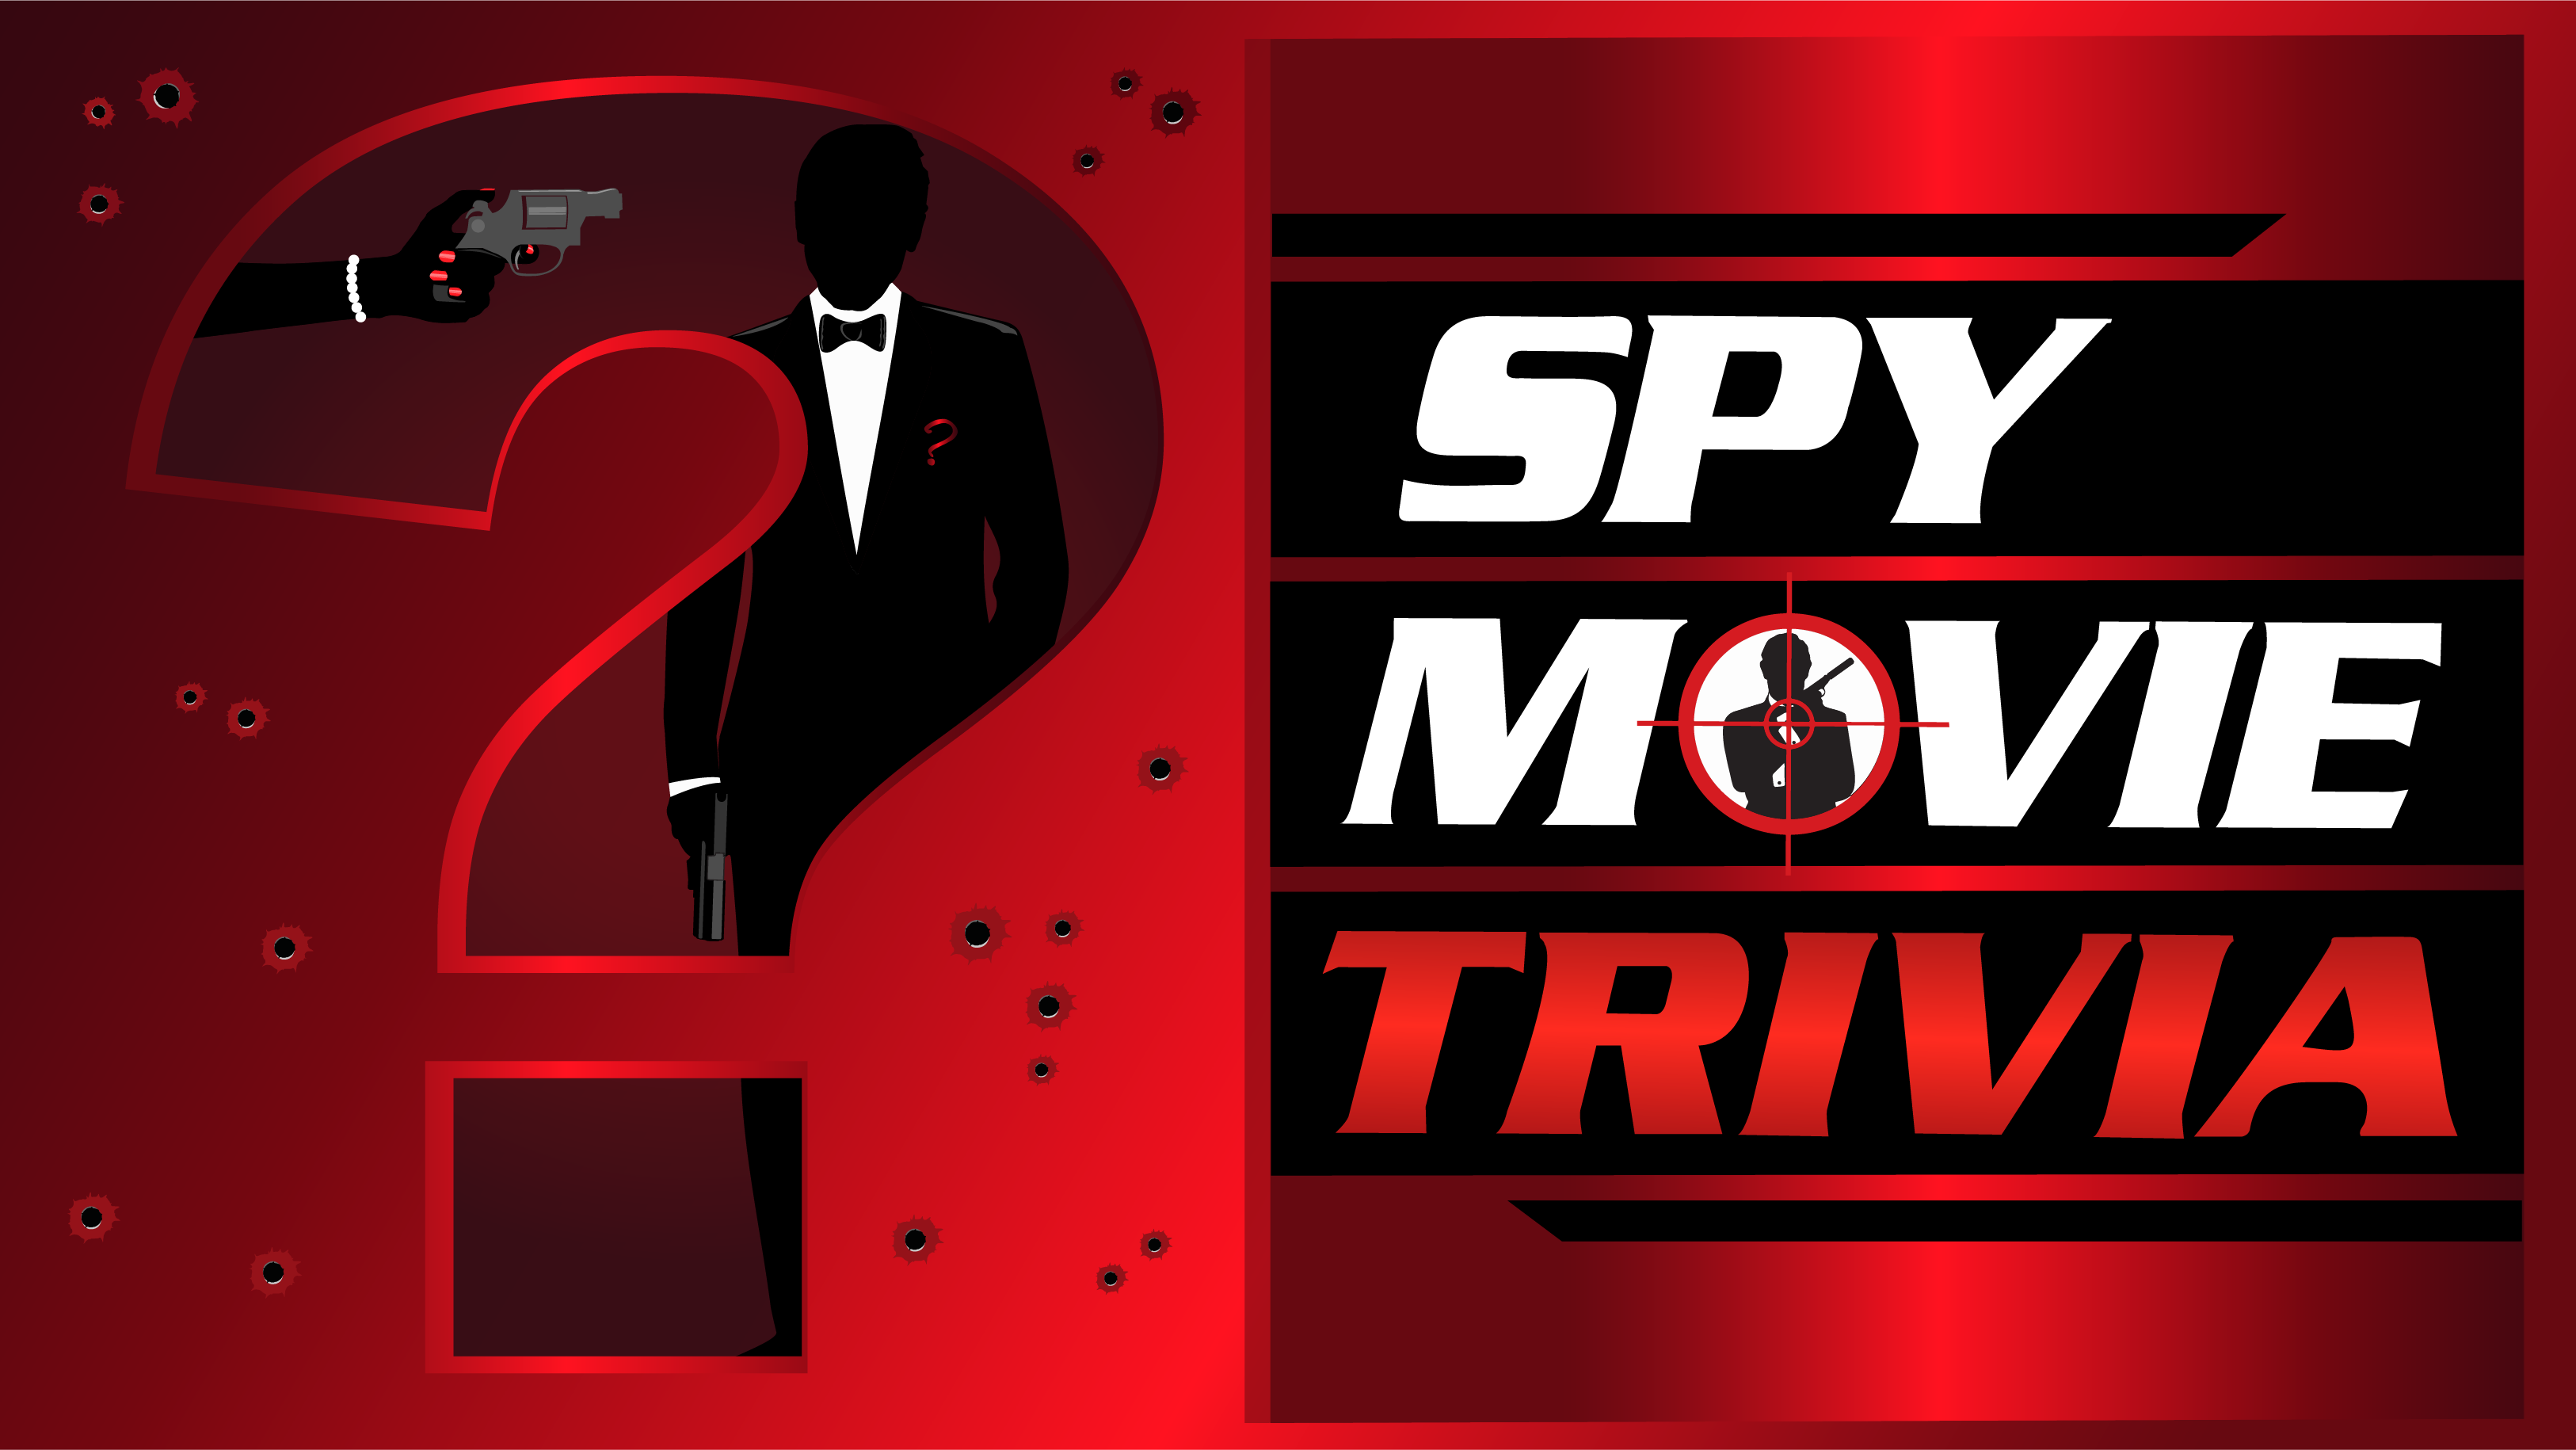 who plays in the movie spy